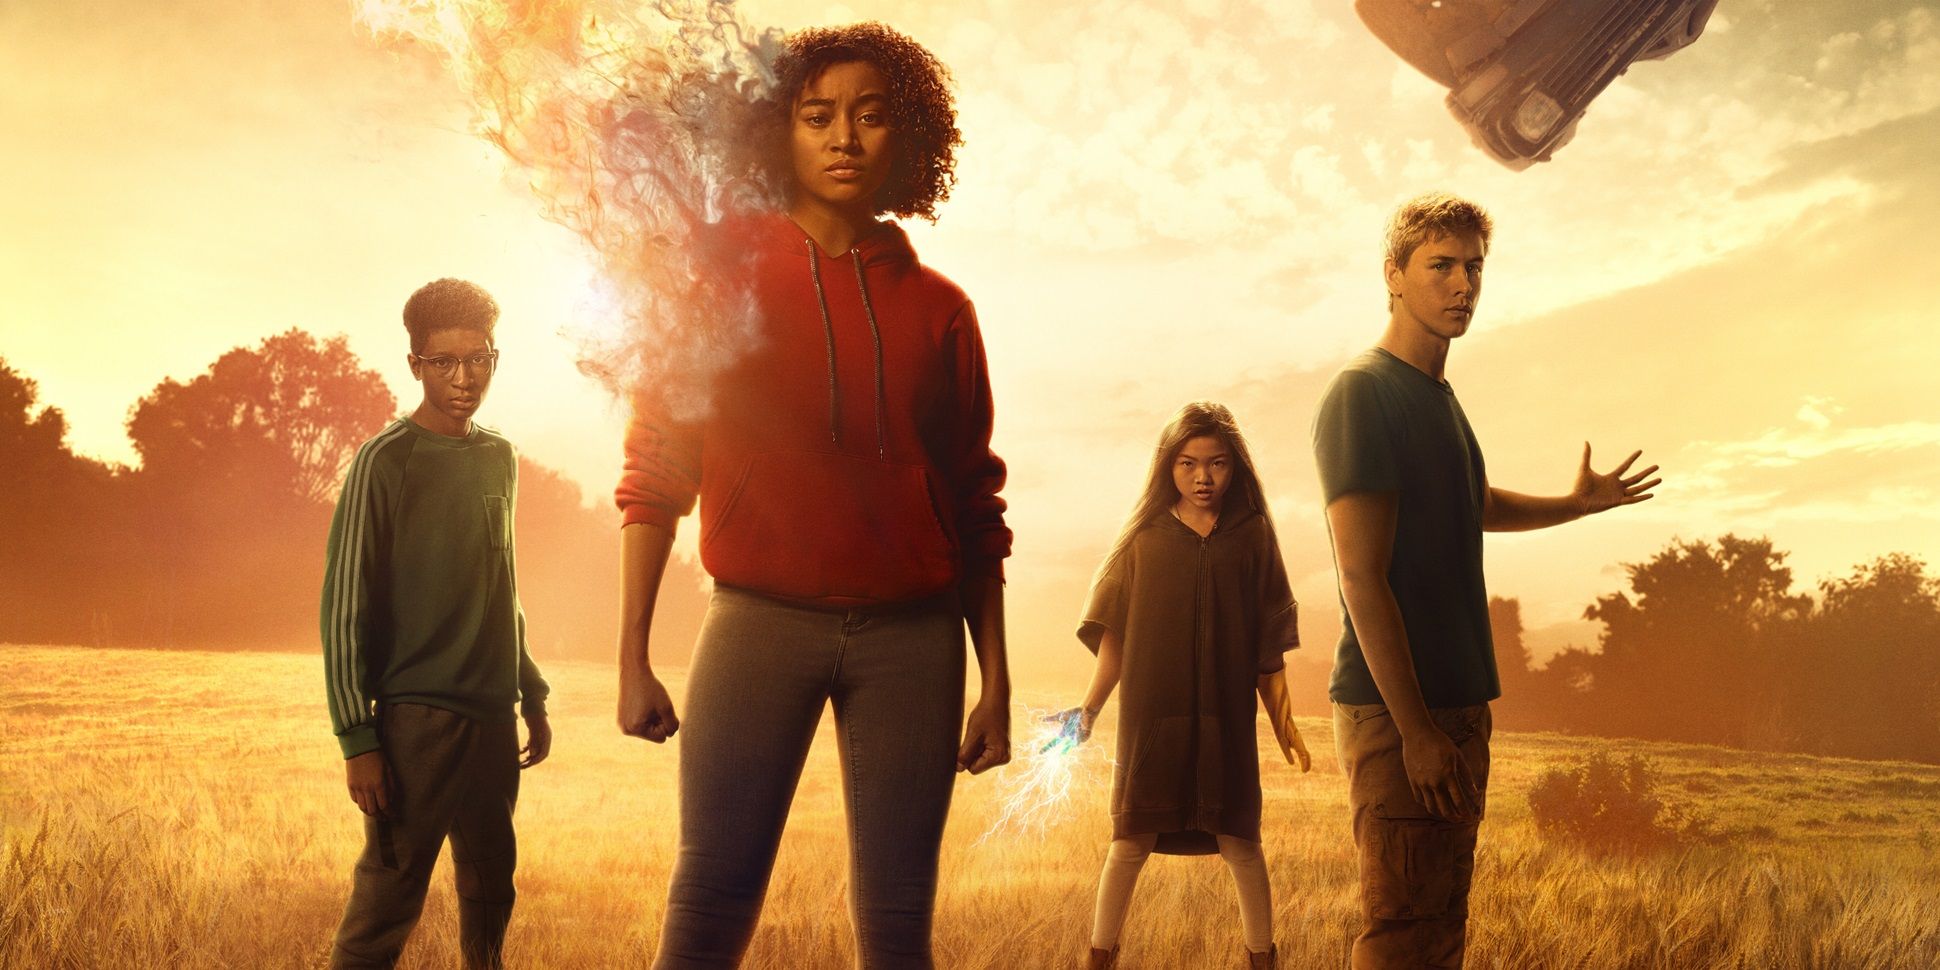 The poster for The Darkest Minds